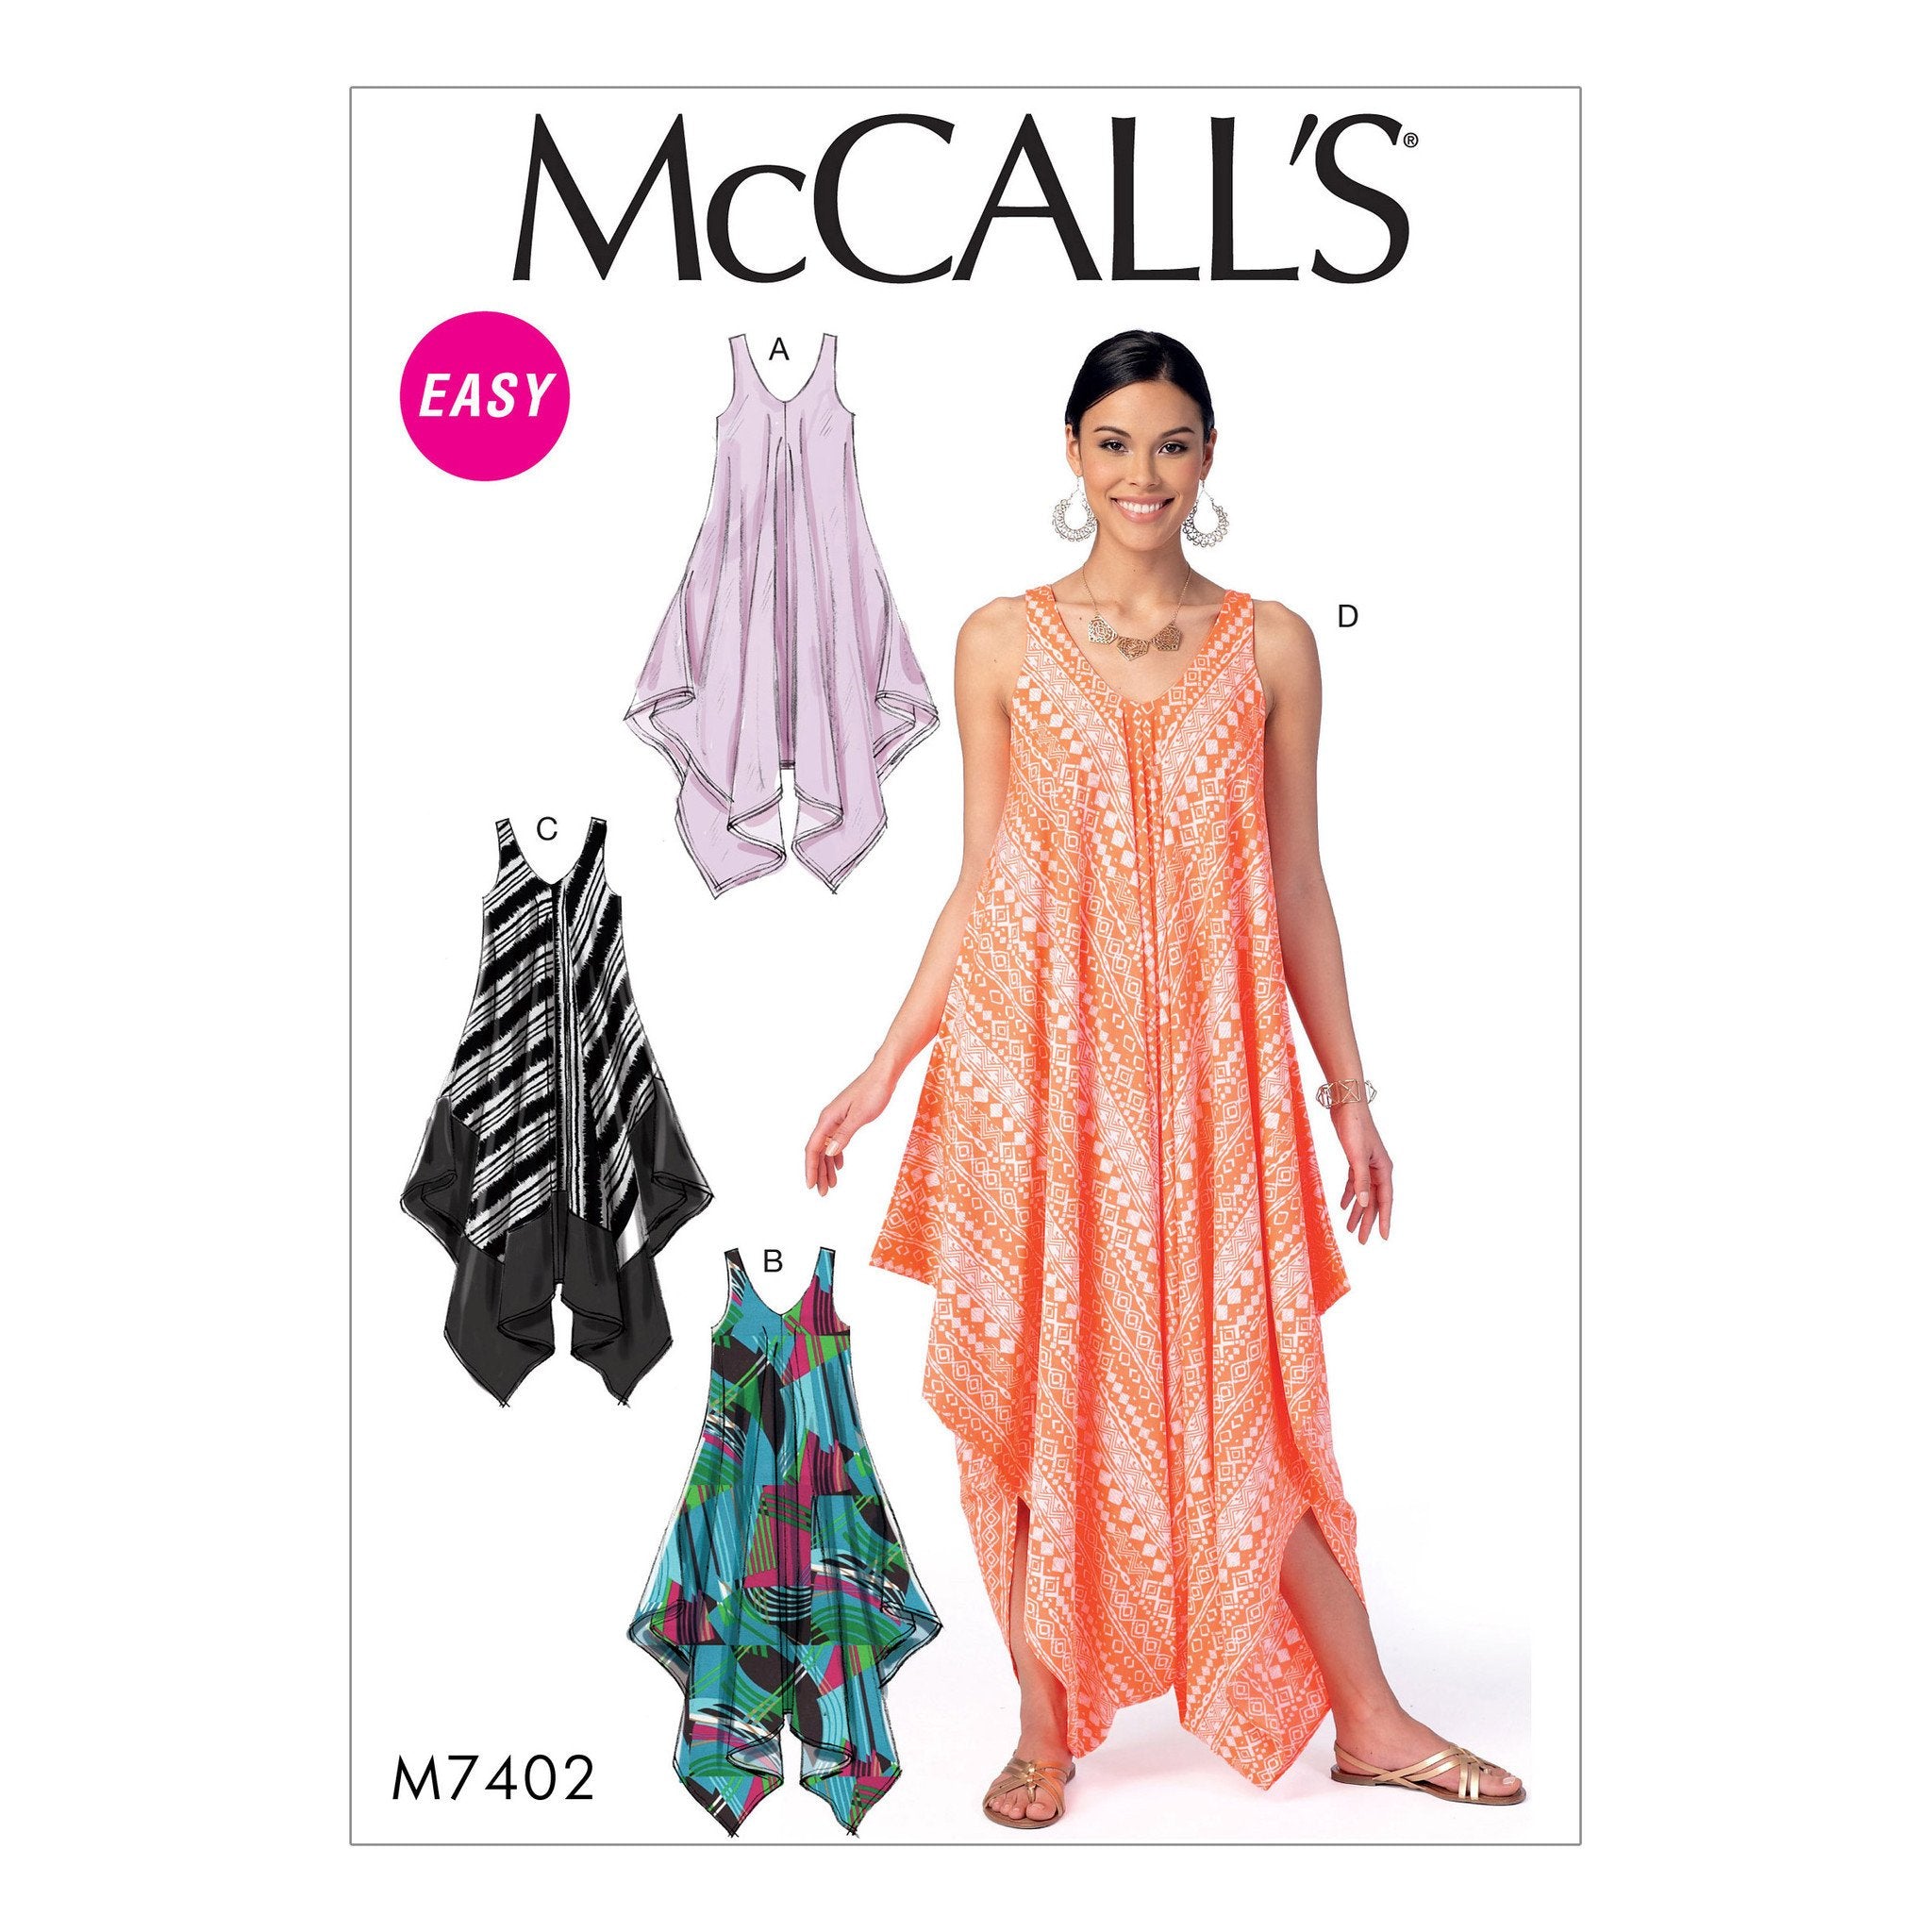 M7402 Dresses and Jumpsuit McCalls pattern from Jaycotts Sewing Supplies